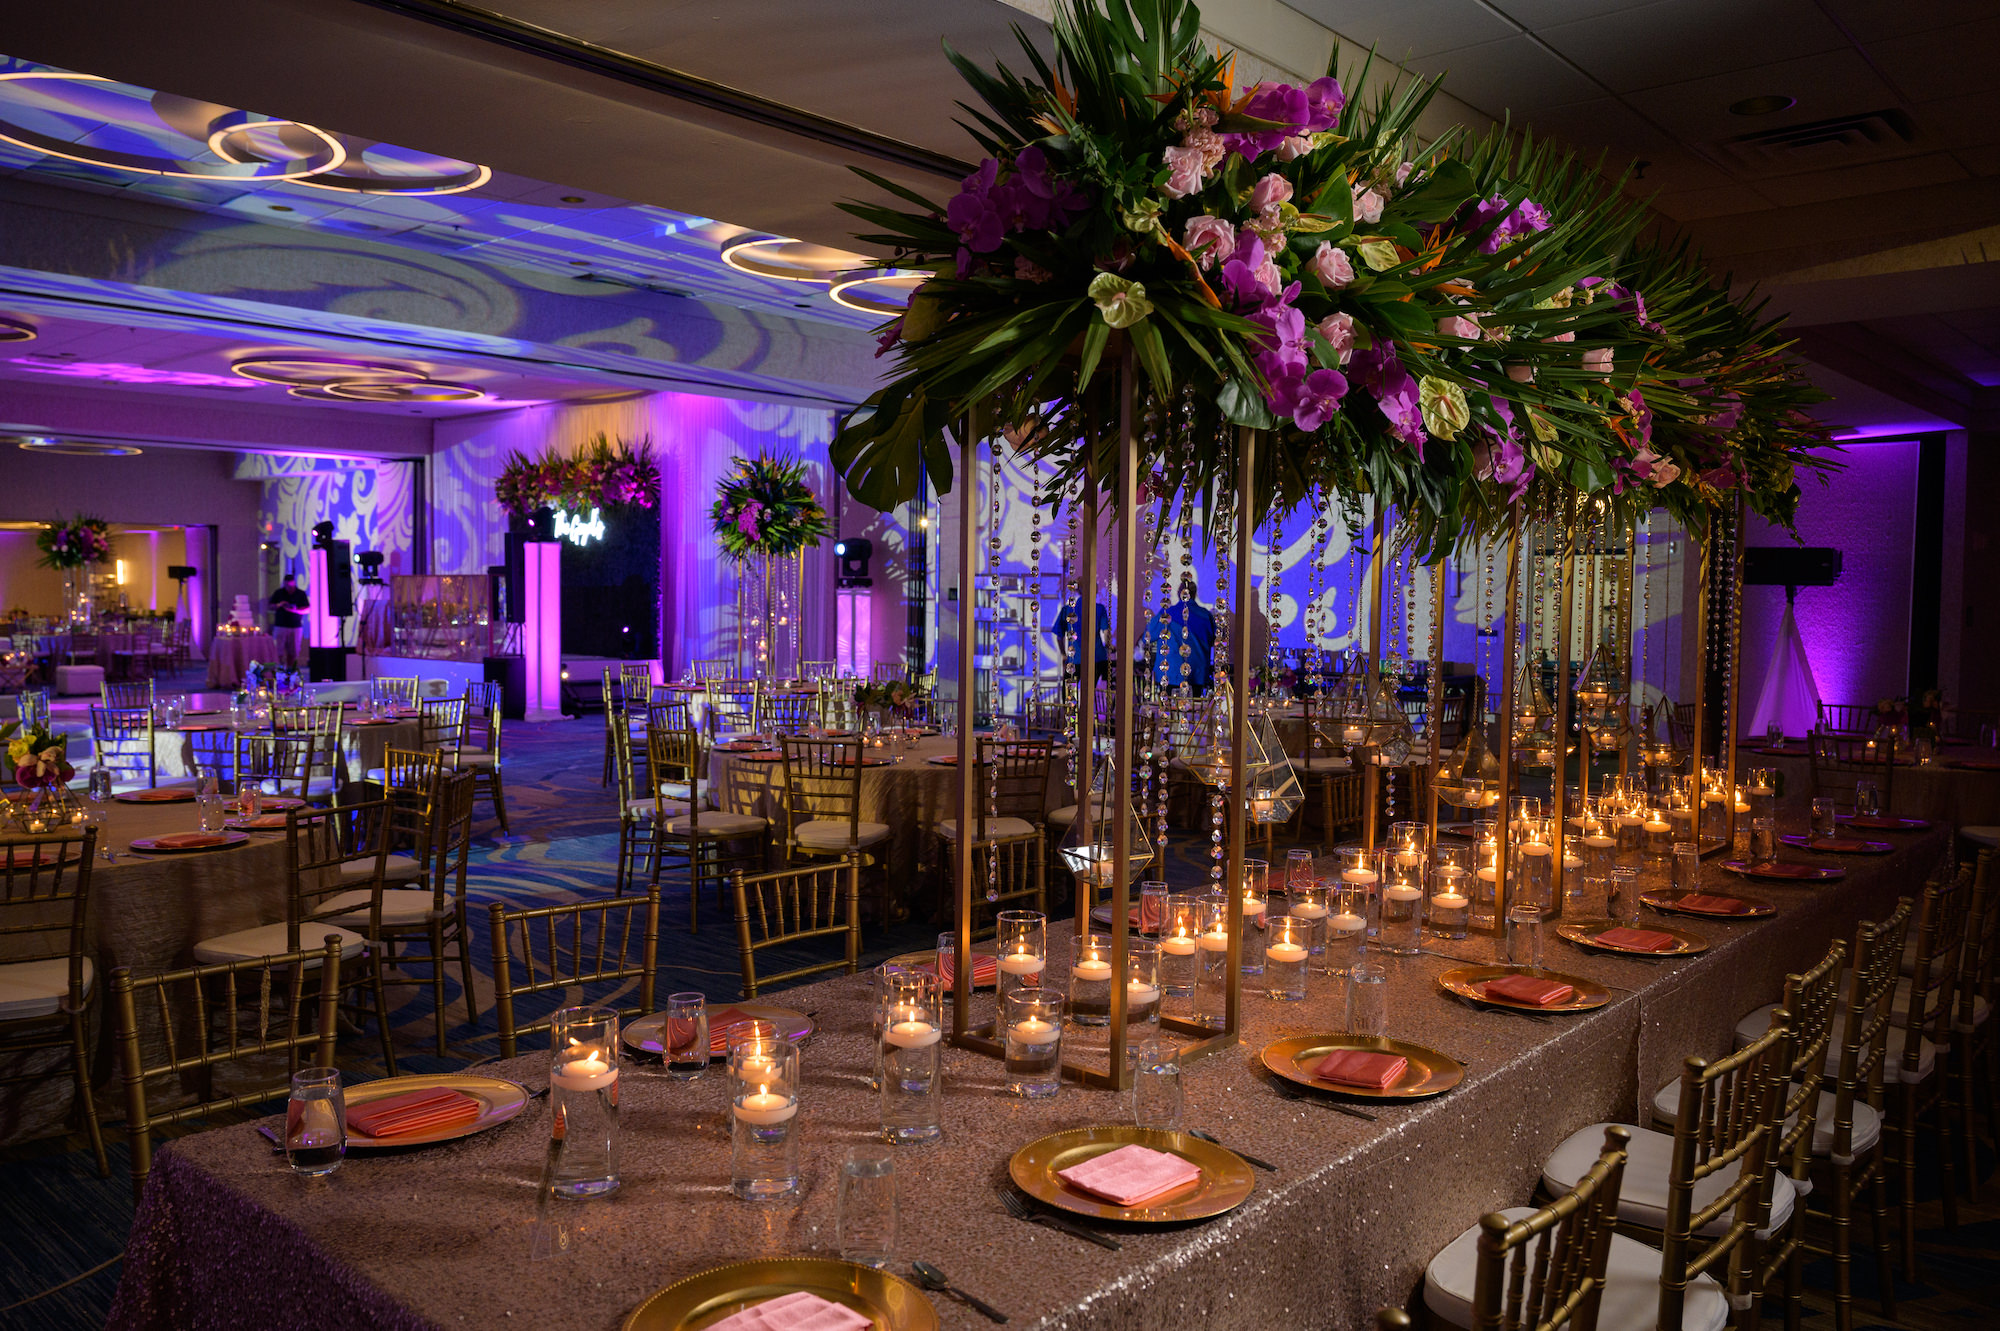 Tropical Wedding Reception and Decor with Tall Floral Centerpieces and Gold Linens Chivari Chairs, Tropical Florals with Fuchsia, Bright Pink, Orange, Purple and Green, Large White Dance floor with Gold Monogram | Tampa Bay Indian Wedding Venue Hilton Clearwater Beach Resort and Spa | Gabro Event Rentals